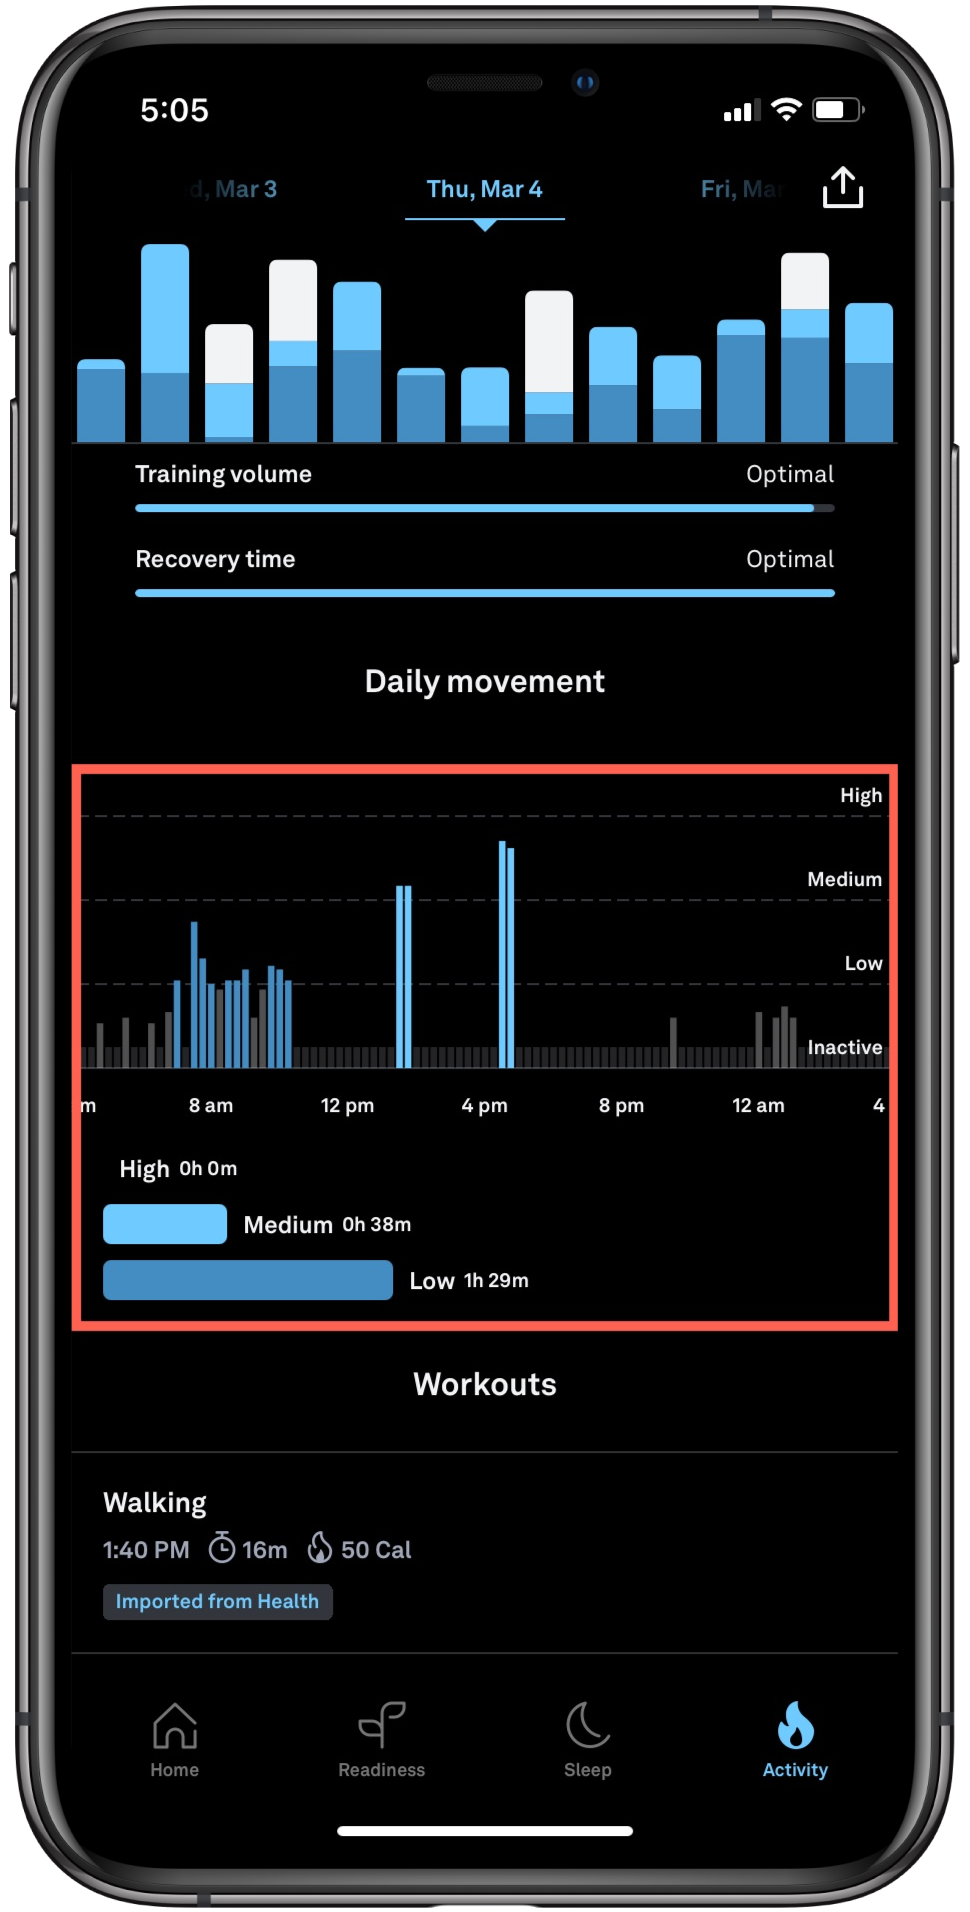 the activity screen with the daily movement graph highlighted. The graph includes a bar chart breaking down the amount of high, medium, and low activity throughout the day